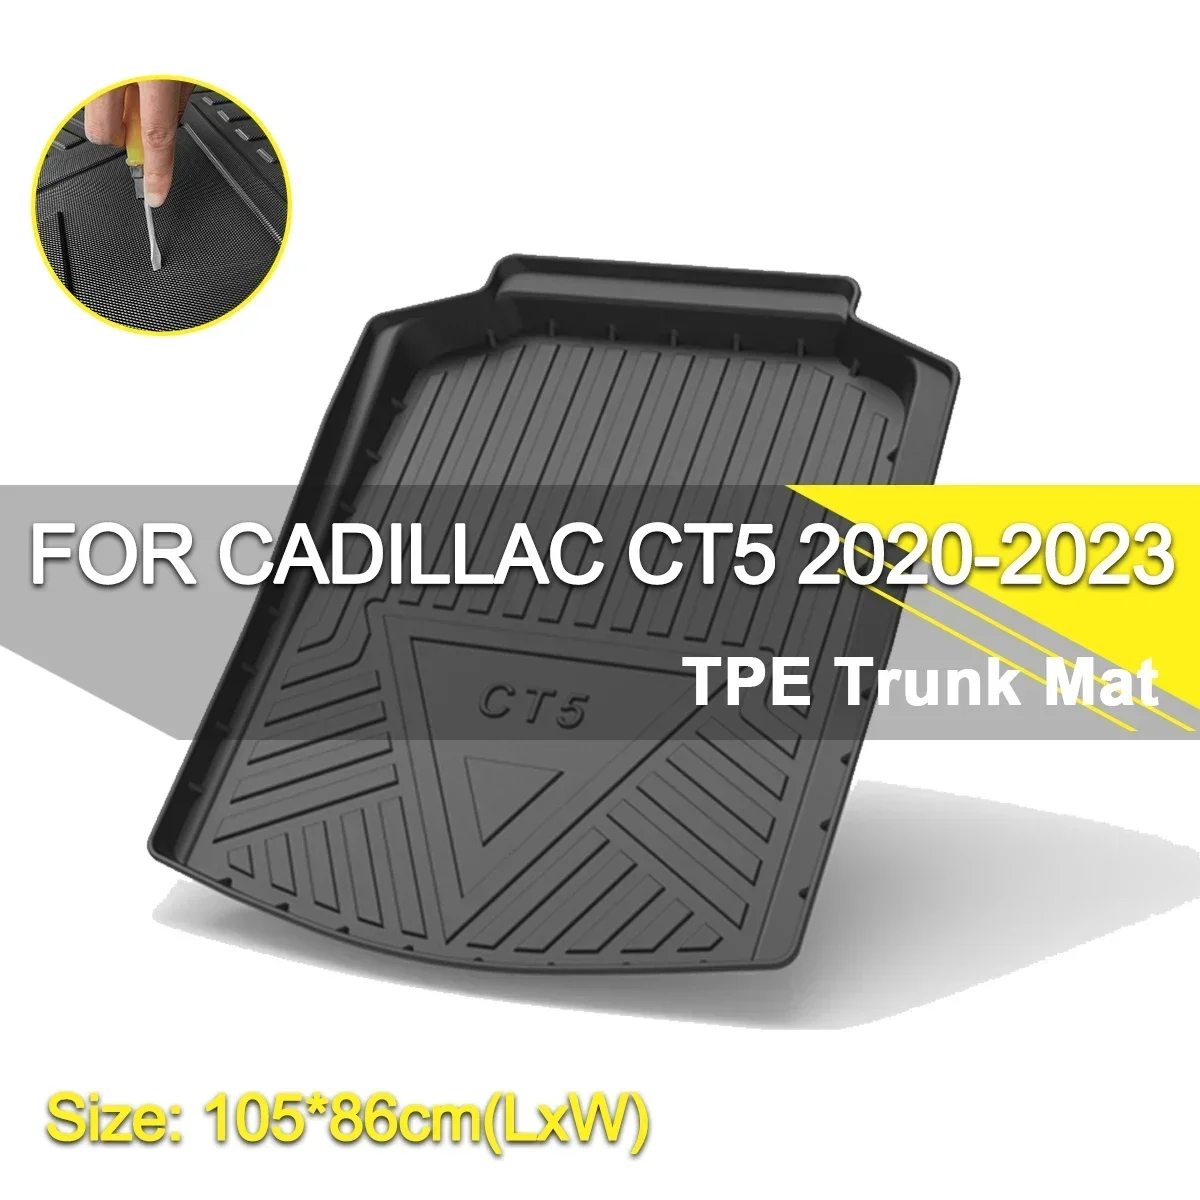 

Car Rear Trunk Cover Mat Waterproof Non-Slip Rubber TPE Cargo Liner Accessories For Cadillac CT5 2020-2023